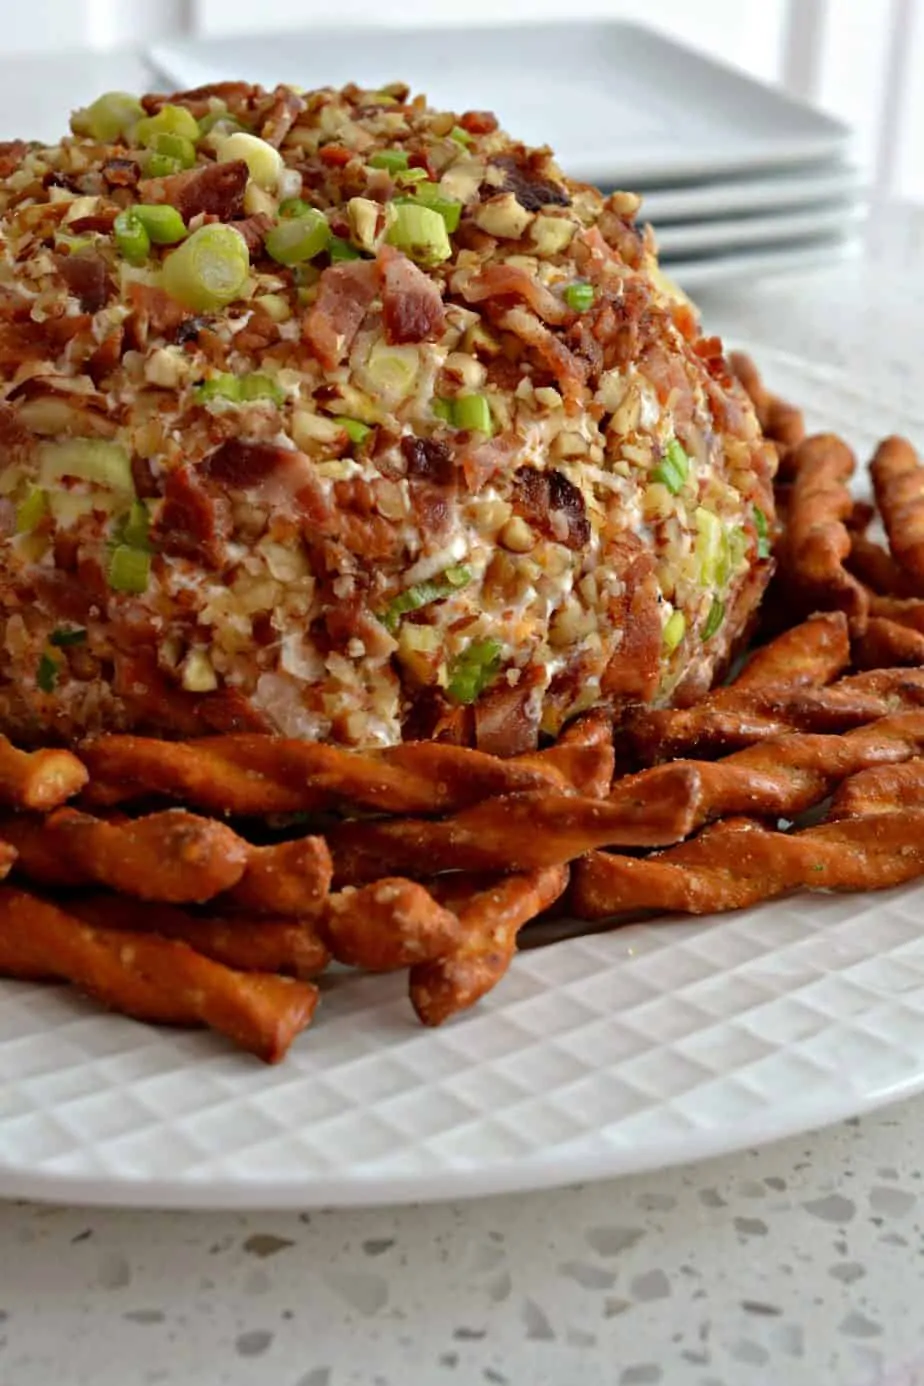 This Bacon Ranch Cheese Ball will be the highlight of your next party